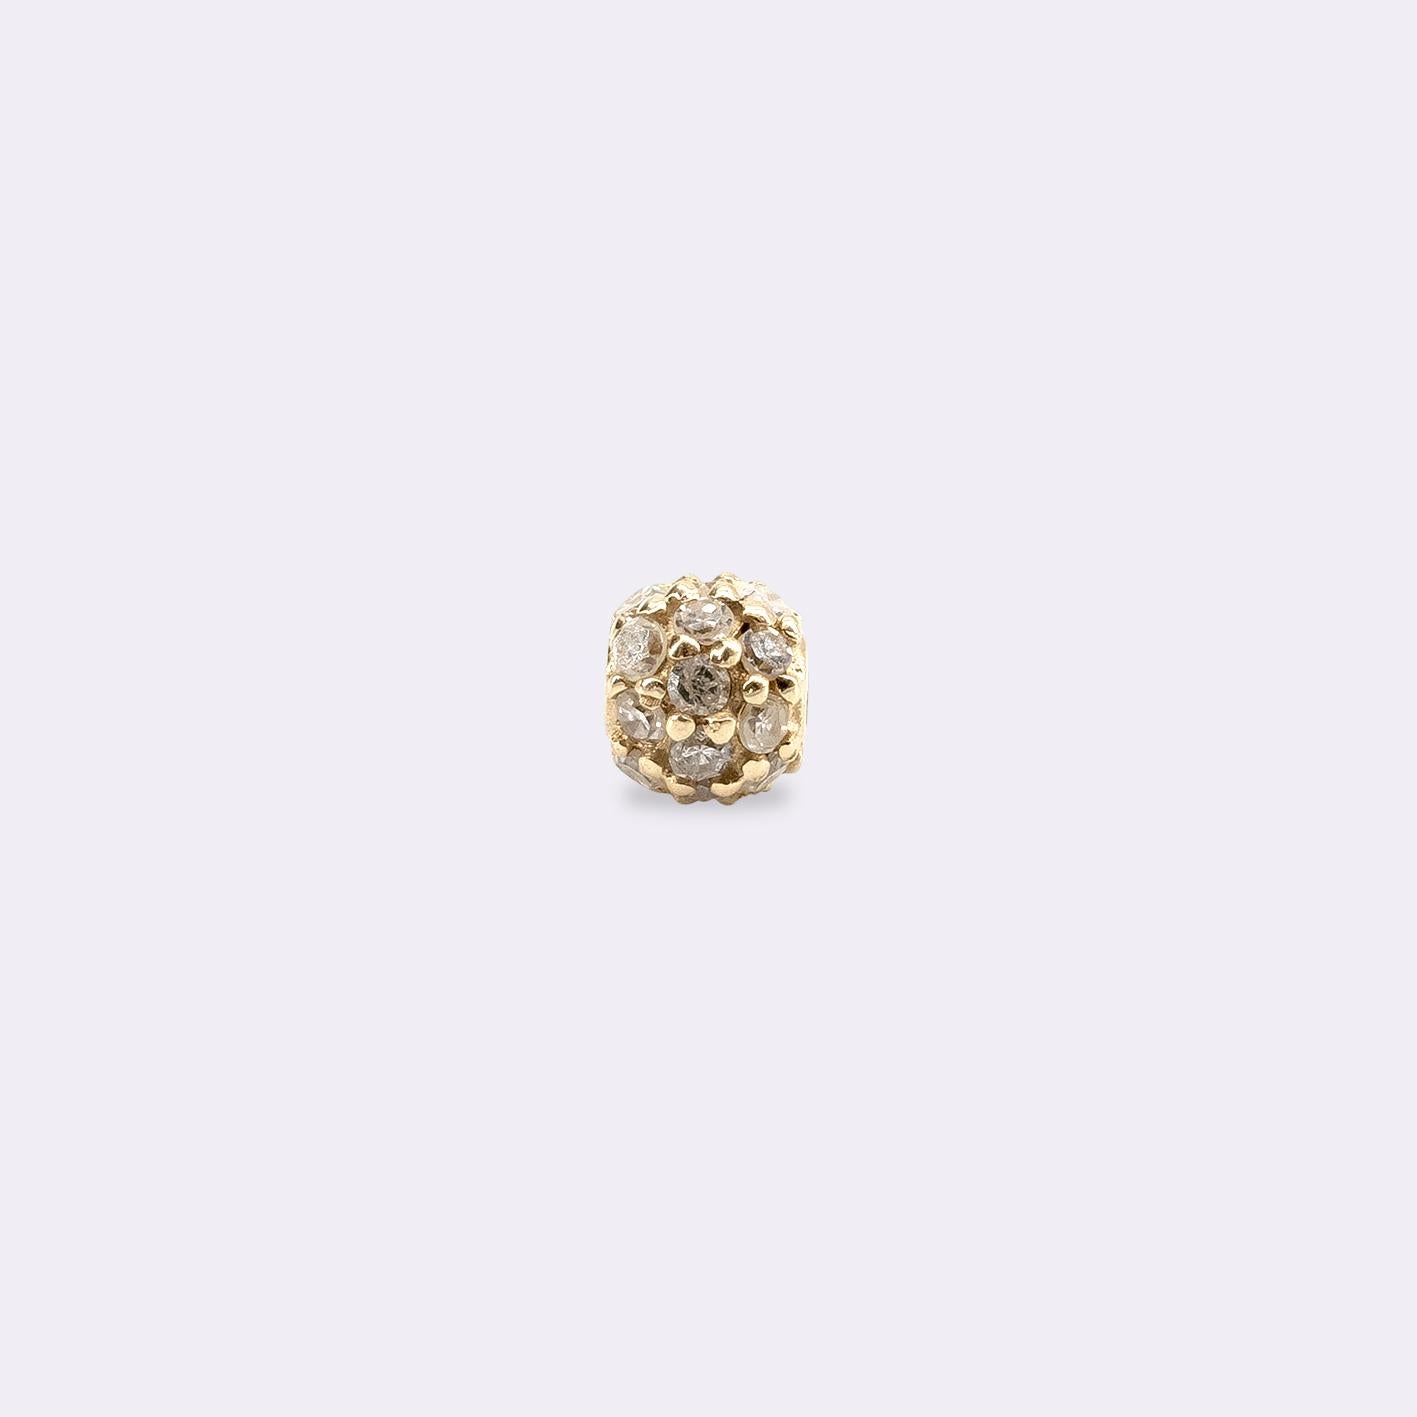 14k yellow gold
21 white diamonds
Diameter 4 mm
Black nylon drawstring closure

This bracelet is a modern classic. Its concise design speaks for itself. The bracelet is barely noticeable, but the diamond ball refracts the light in an impressive